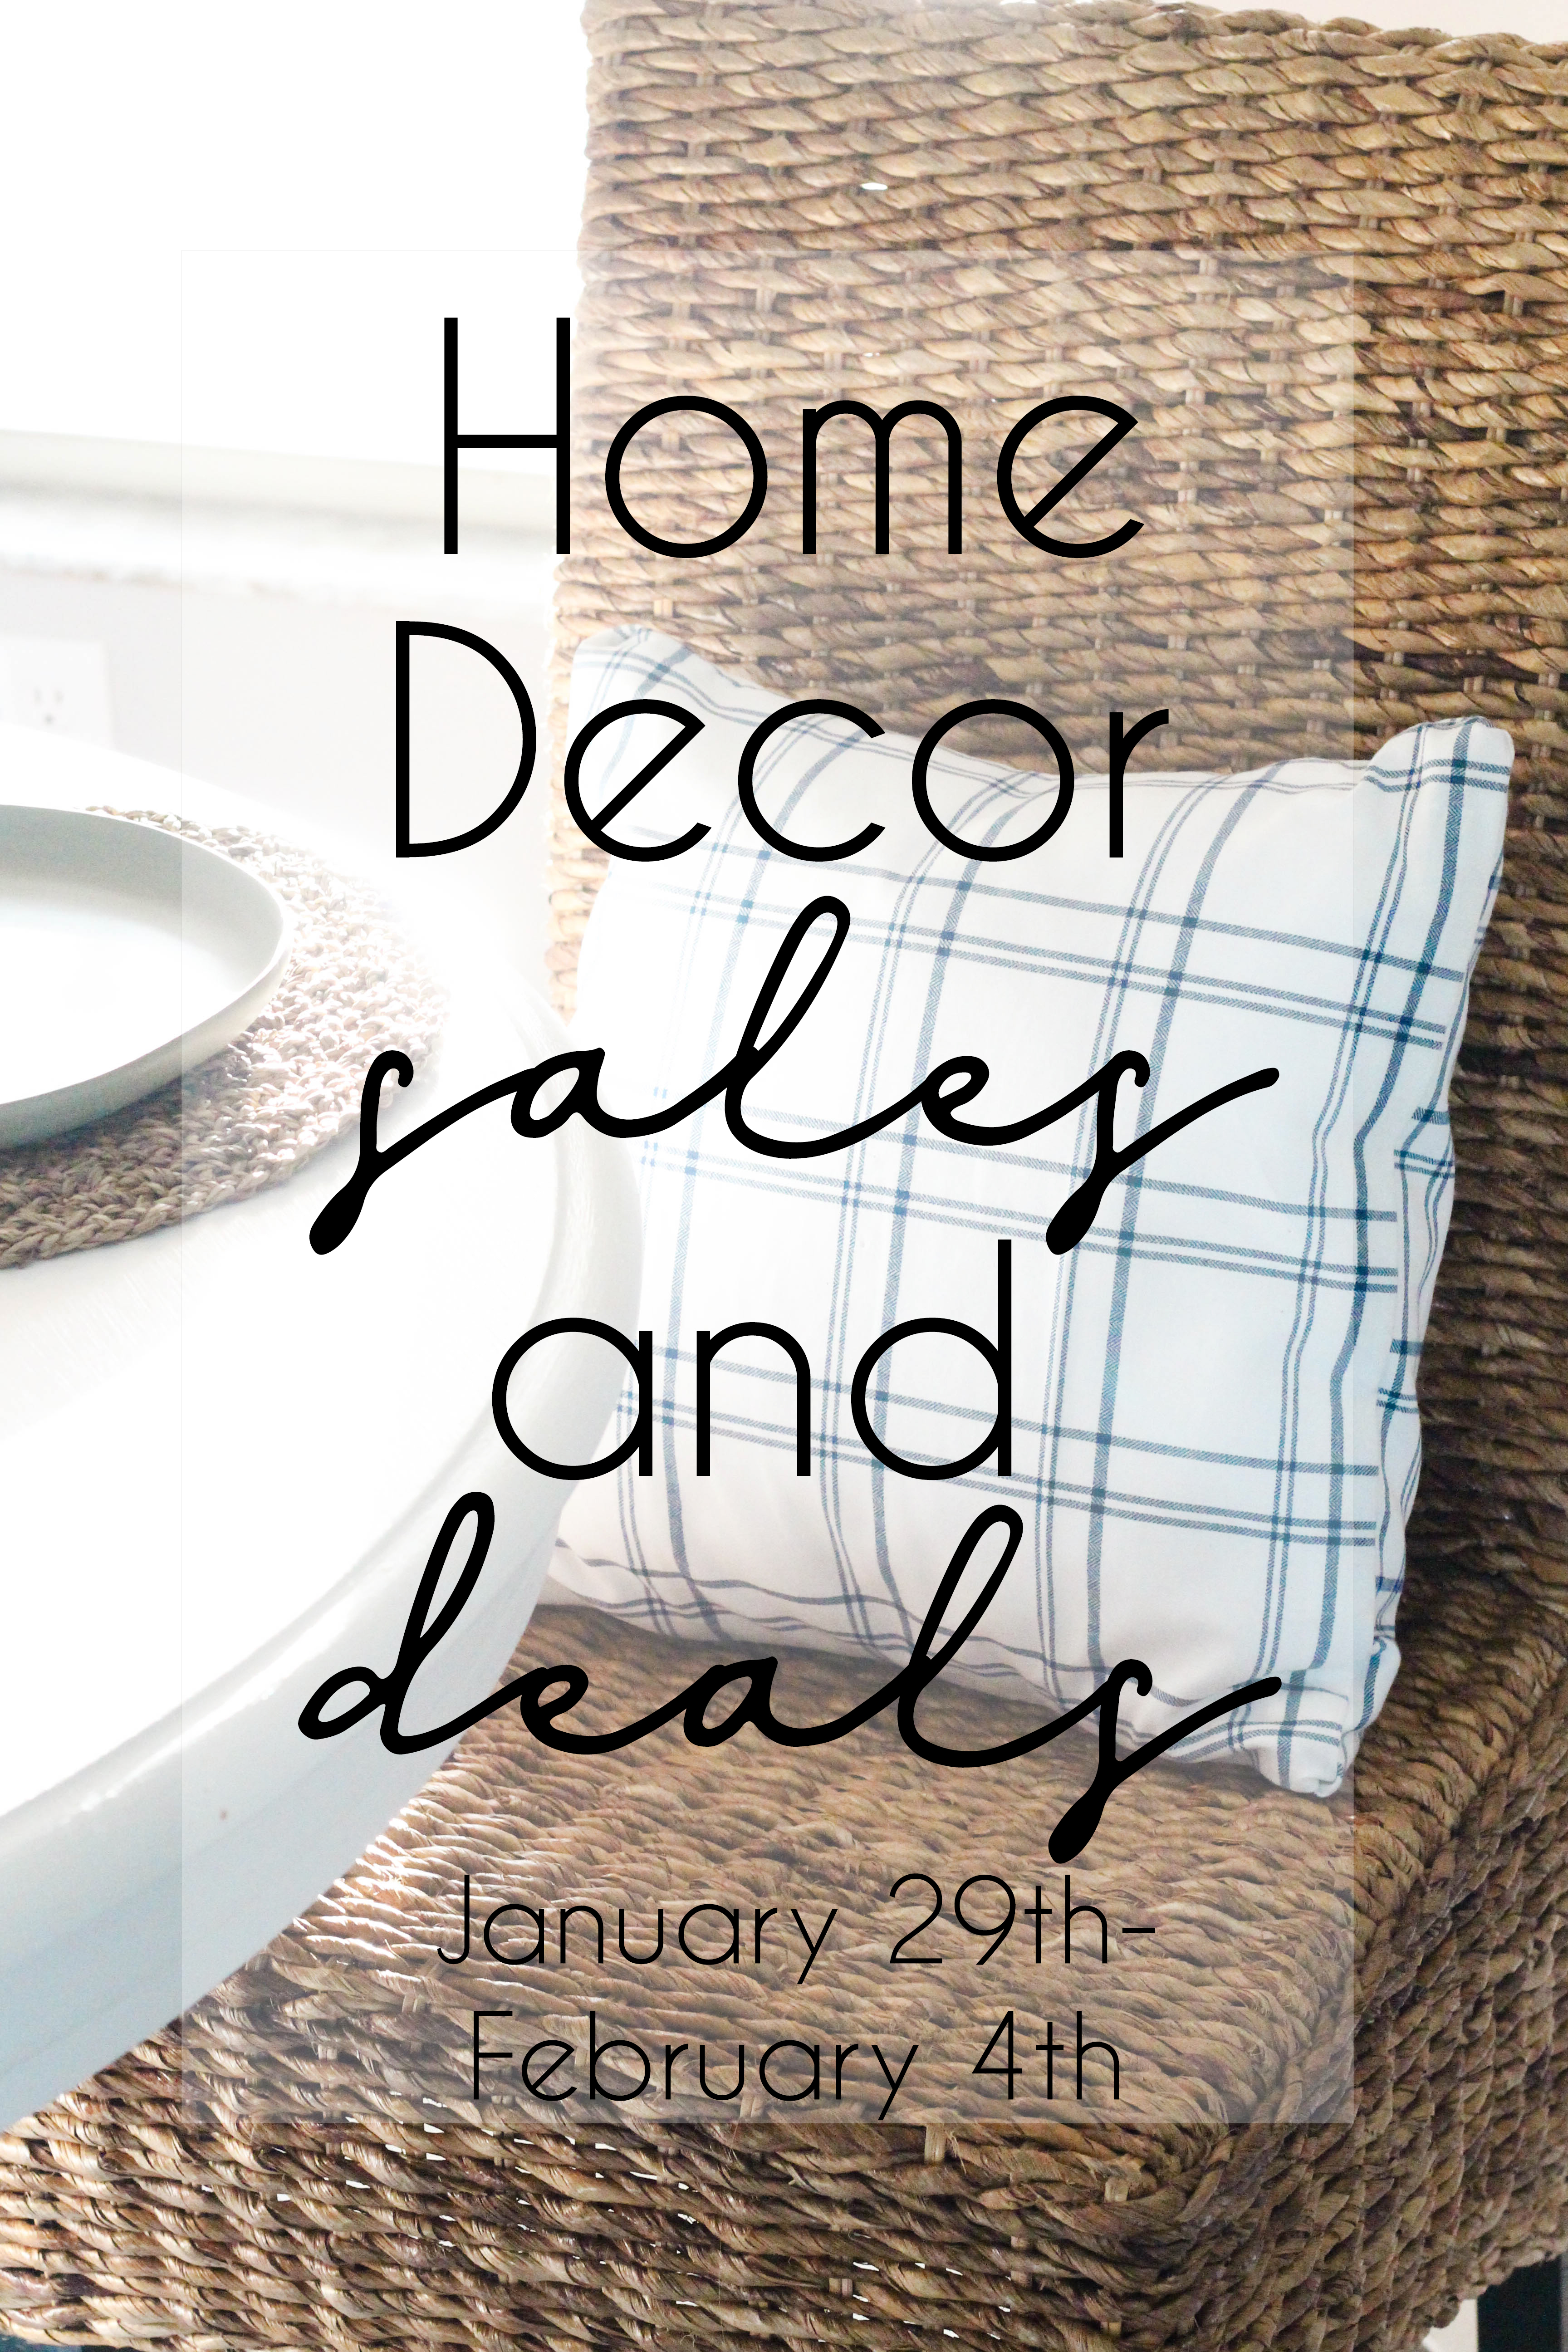 Home Decor Sales Jan 29 - Feb 4 by Within the Grove